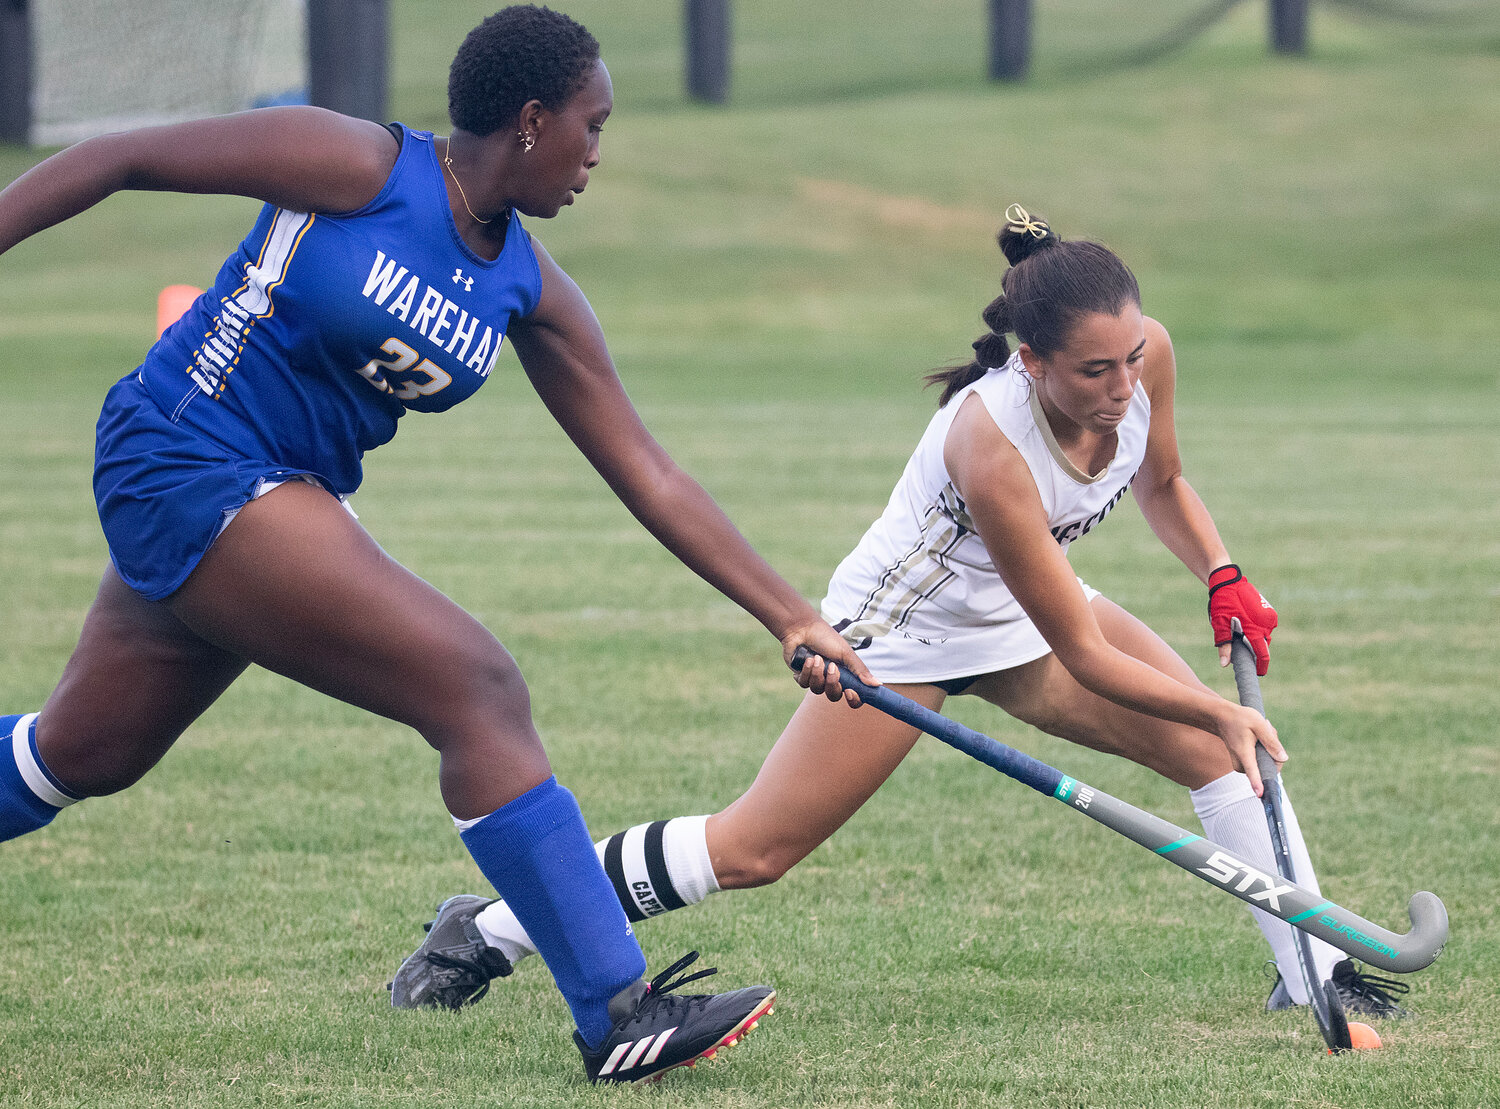 Wildcats’ senior captain Avery Avila leads the team with her gritty, tenacious play on the field. Westport beat Wareham 6-0 during a home game on Tuesday afternoon. The Wildcats are currently 3-0.